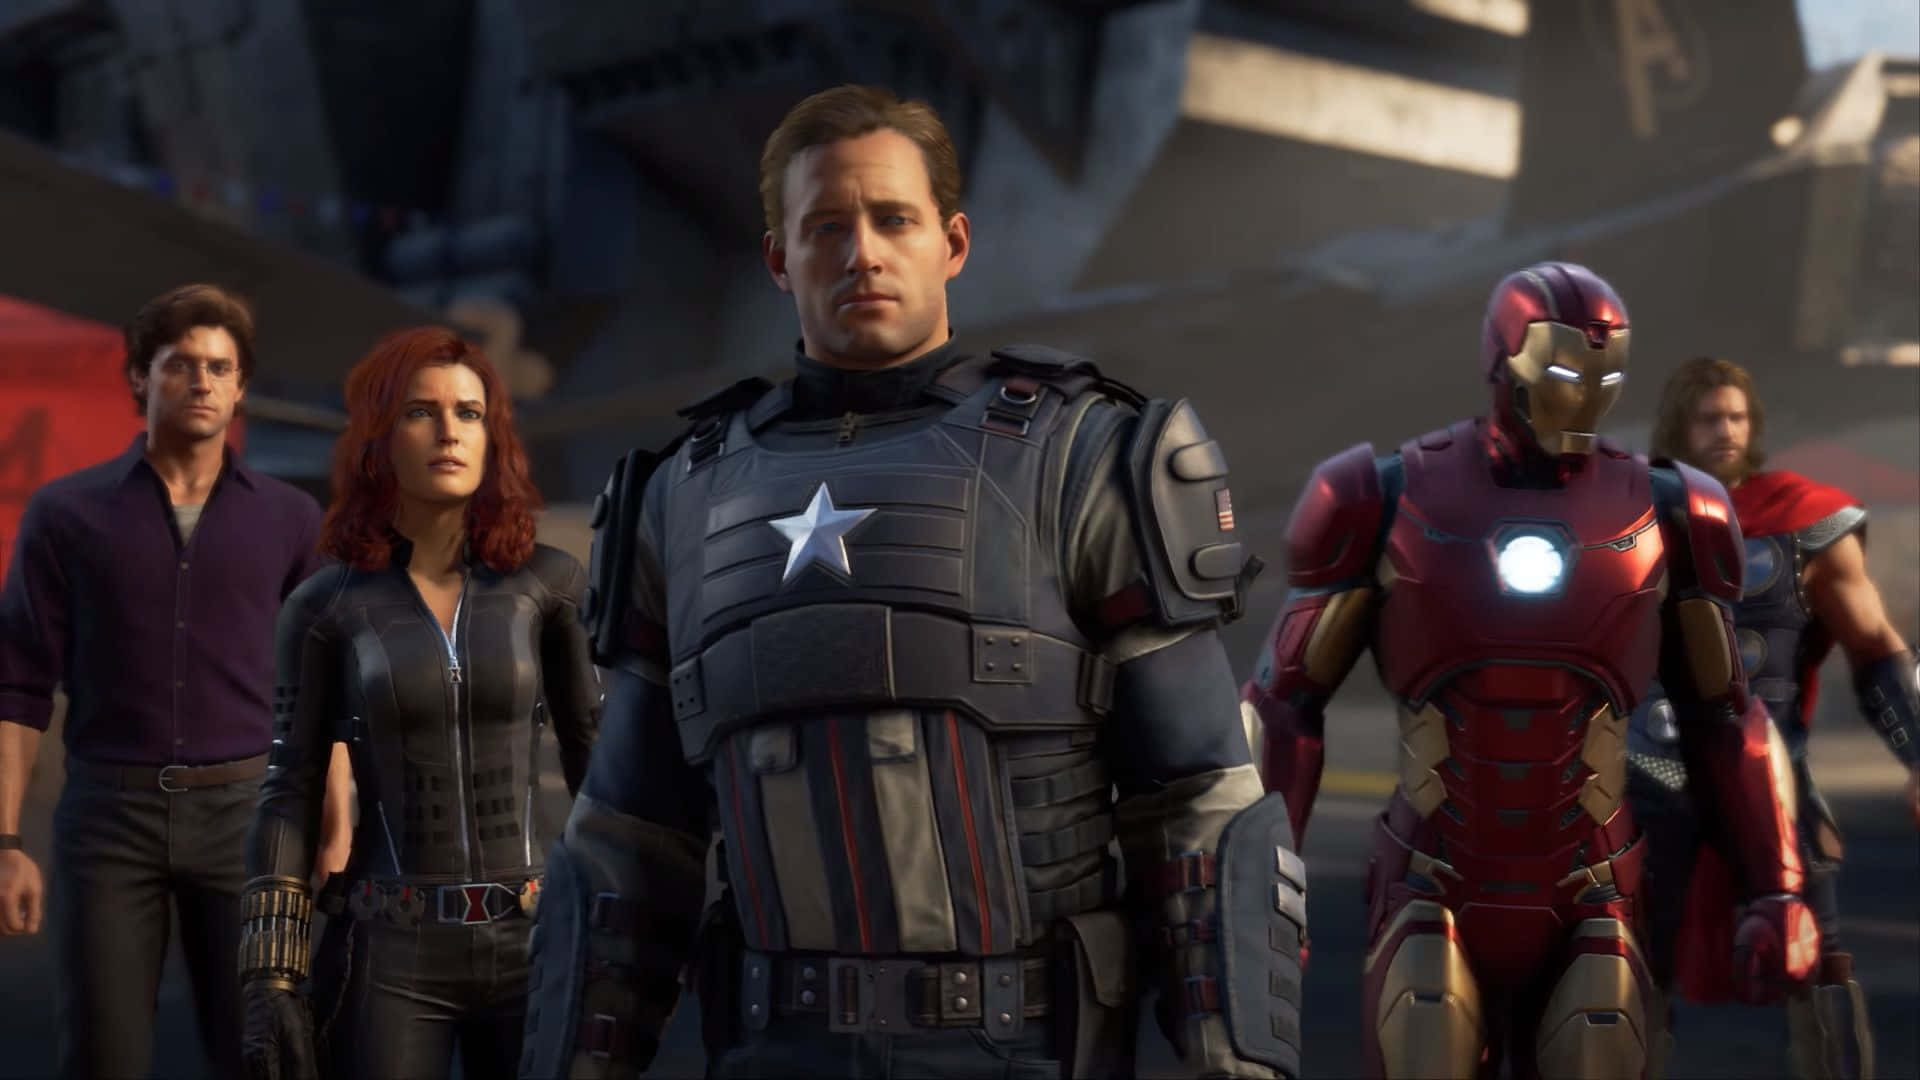 Assemble your team in this immersive Marvel Avengers game! Wallpaper